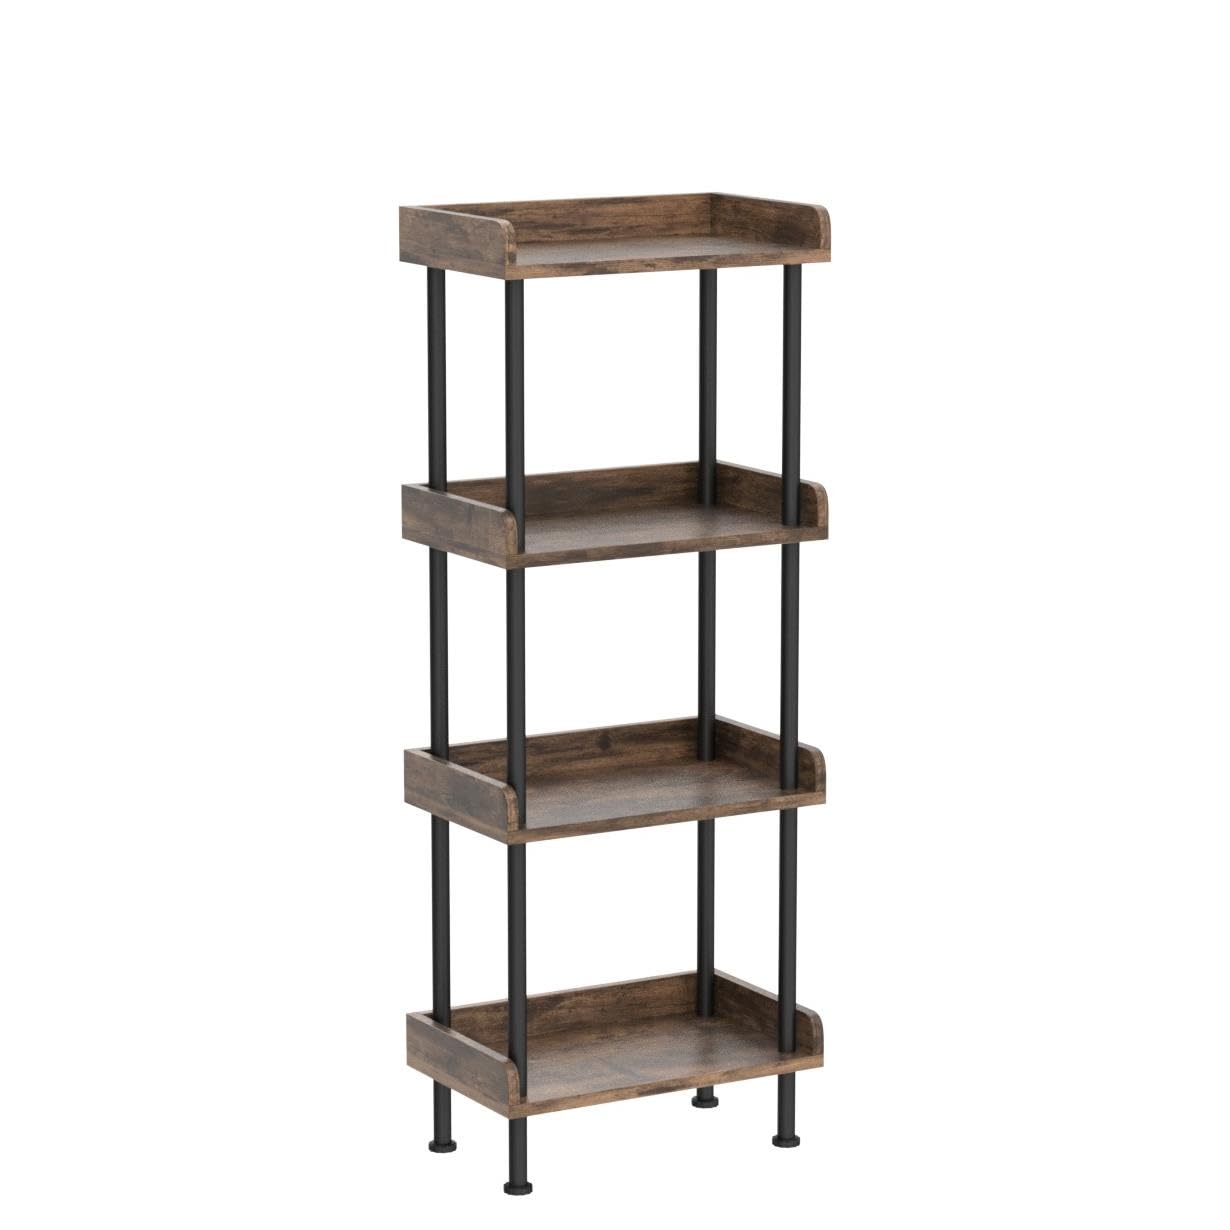 Hosfais Bookcase 4 Tier Bookshelf, Vintage Small Bookshelf for Small Spaces, Wooden Book Shelf Small Bookcase for Living Room Bedroom